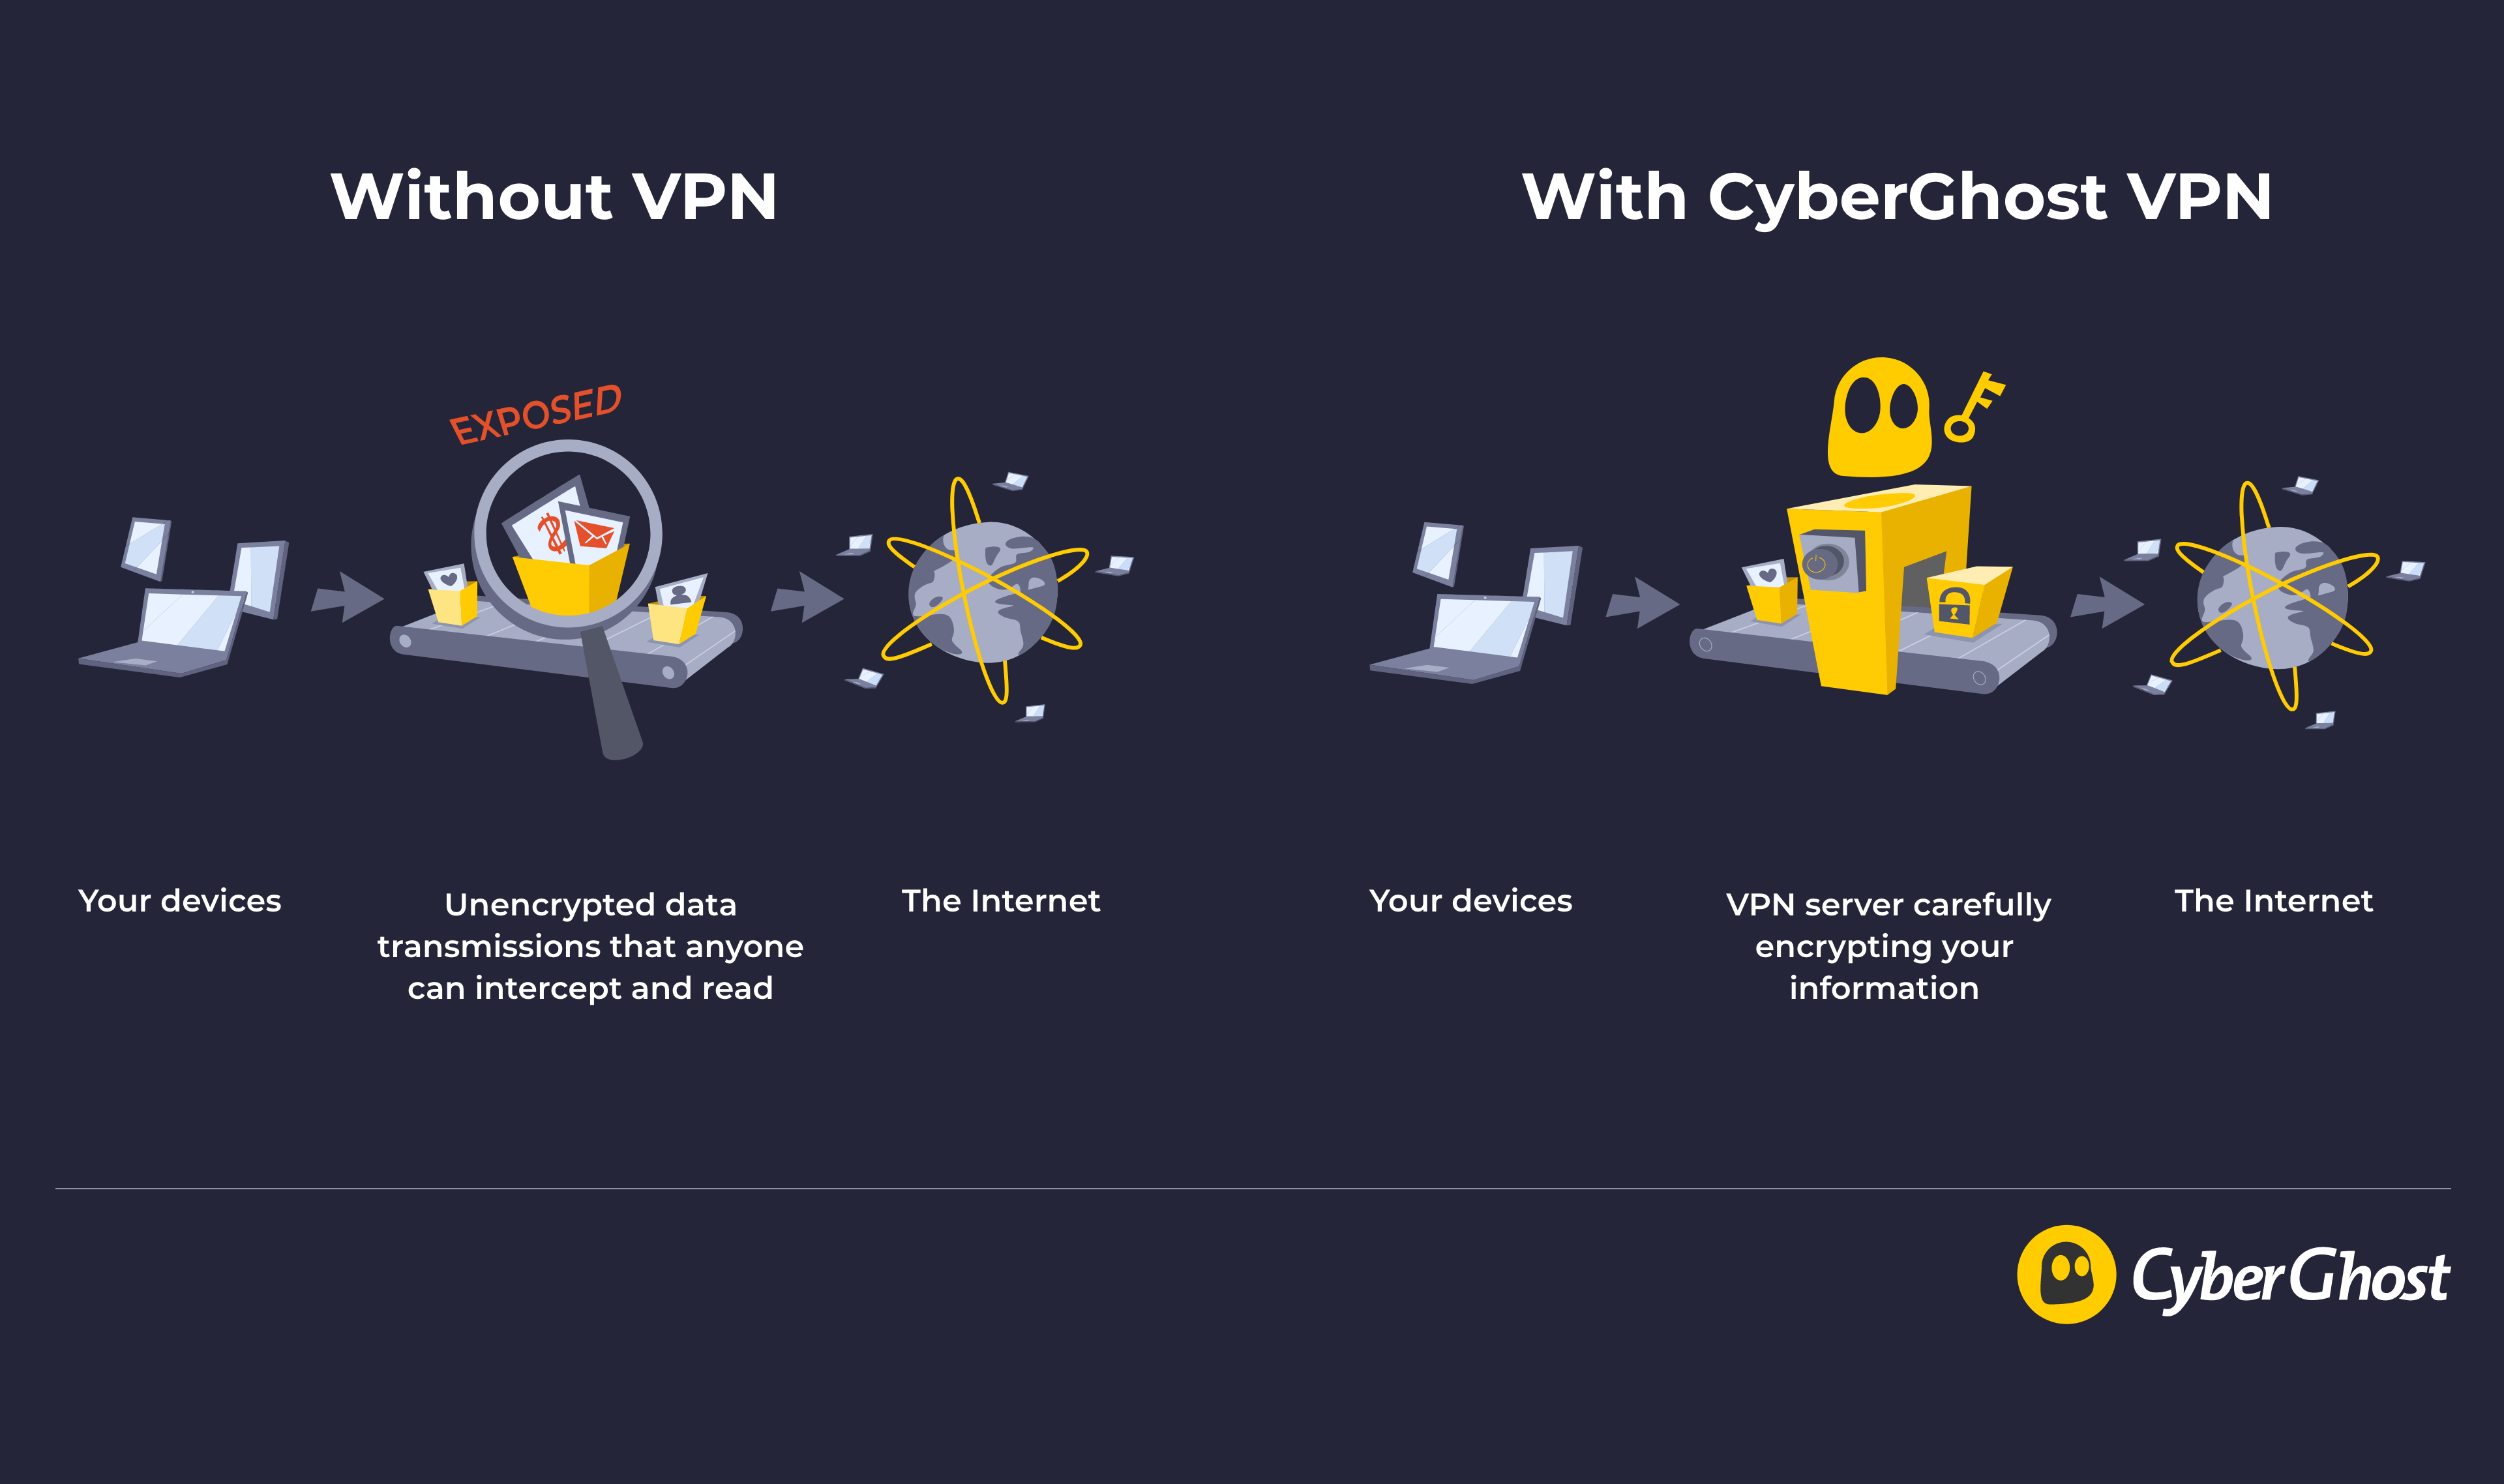 Comparison between surfing online with and without CyberGhost VPN’s encryption